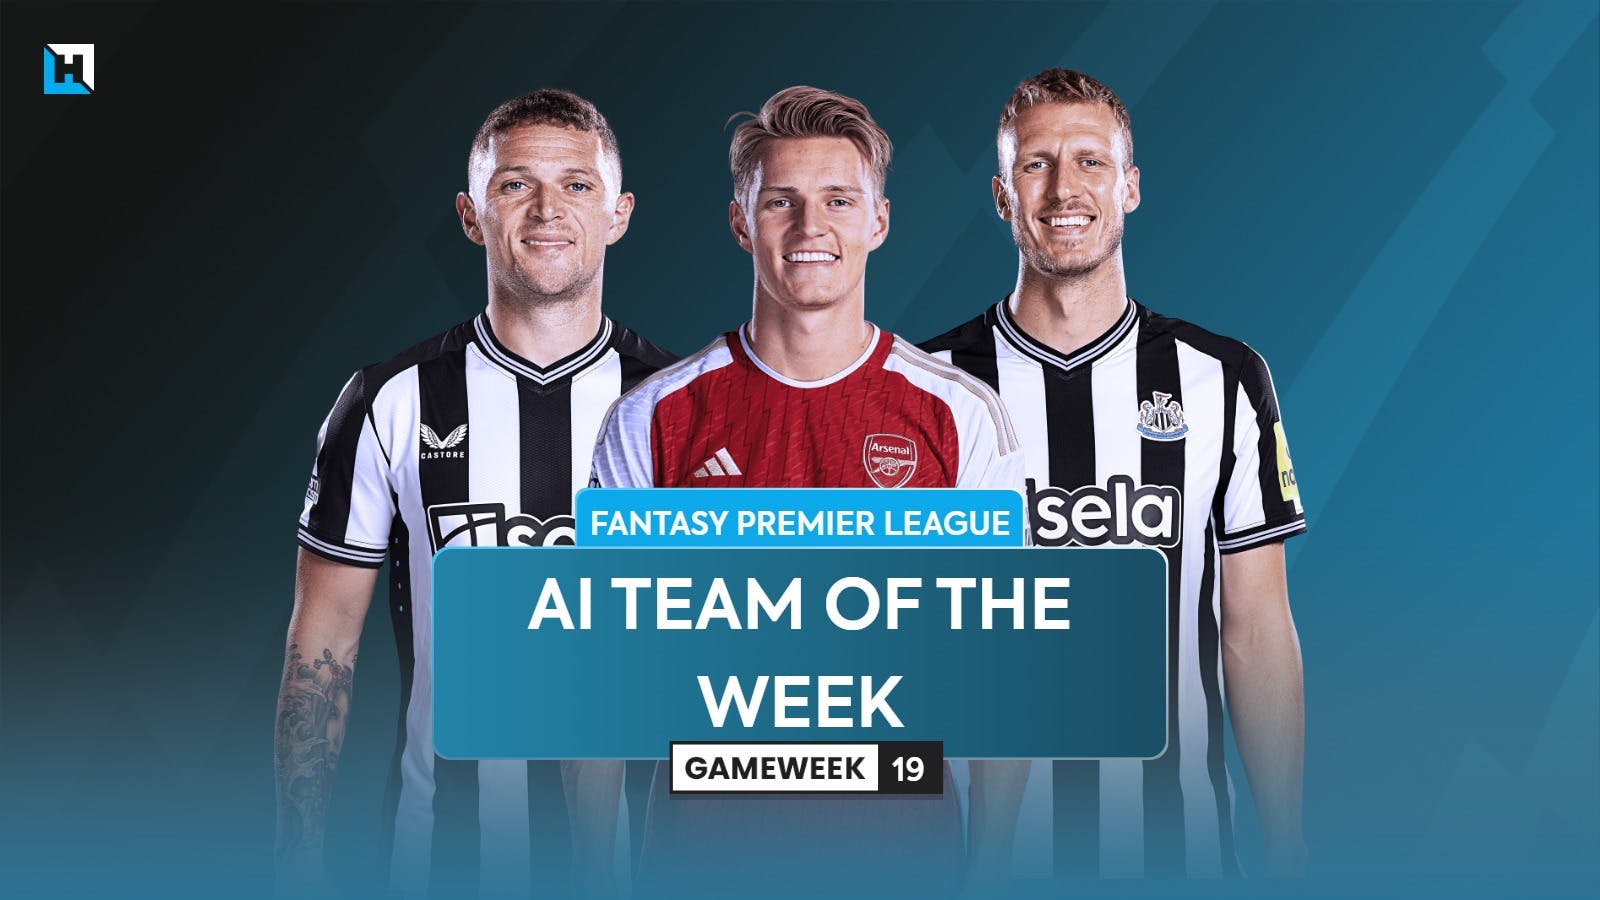 The best FPL team for Gameweek 19 according to Hub AI